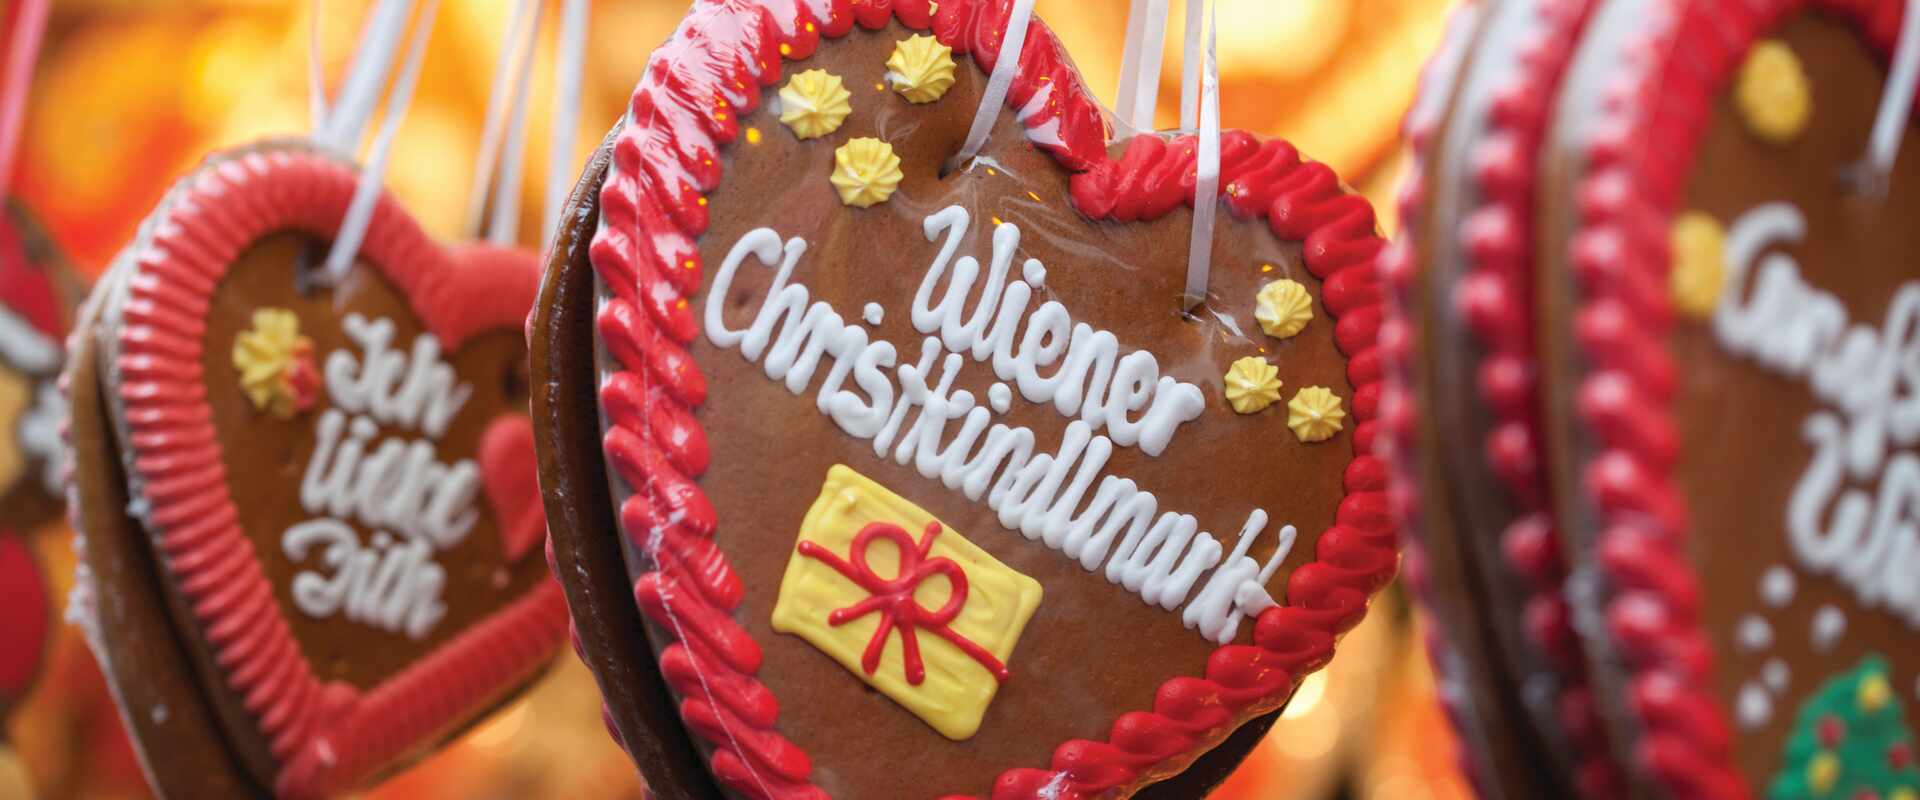 Ginger bread ornaments at Christmas market in Vienna, Austria